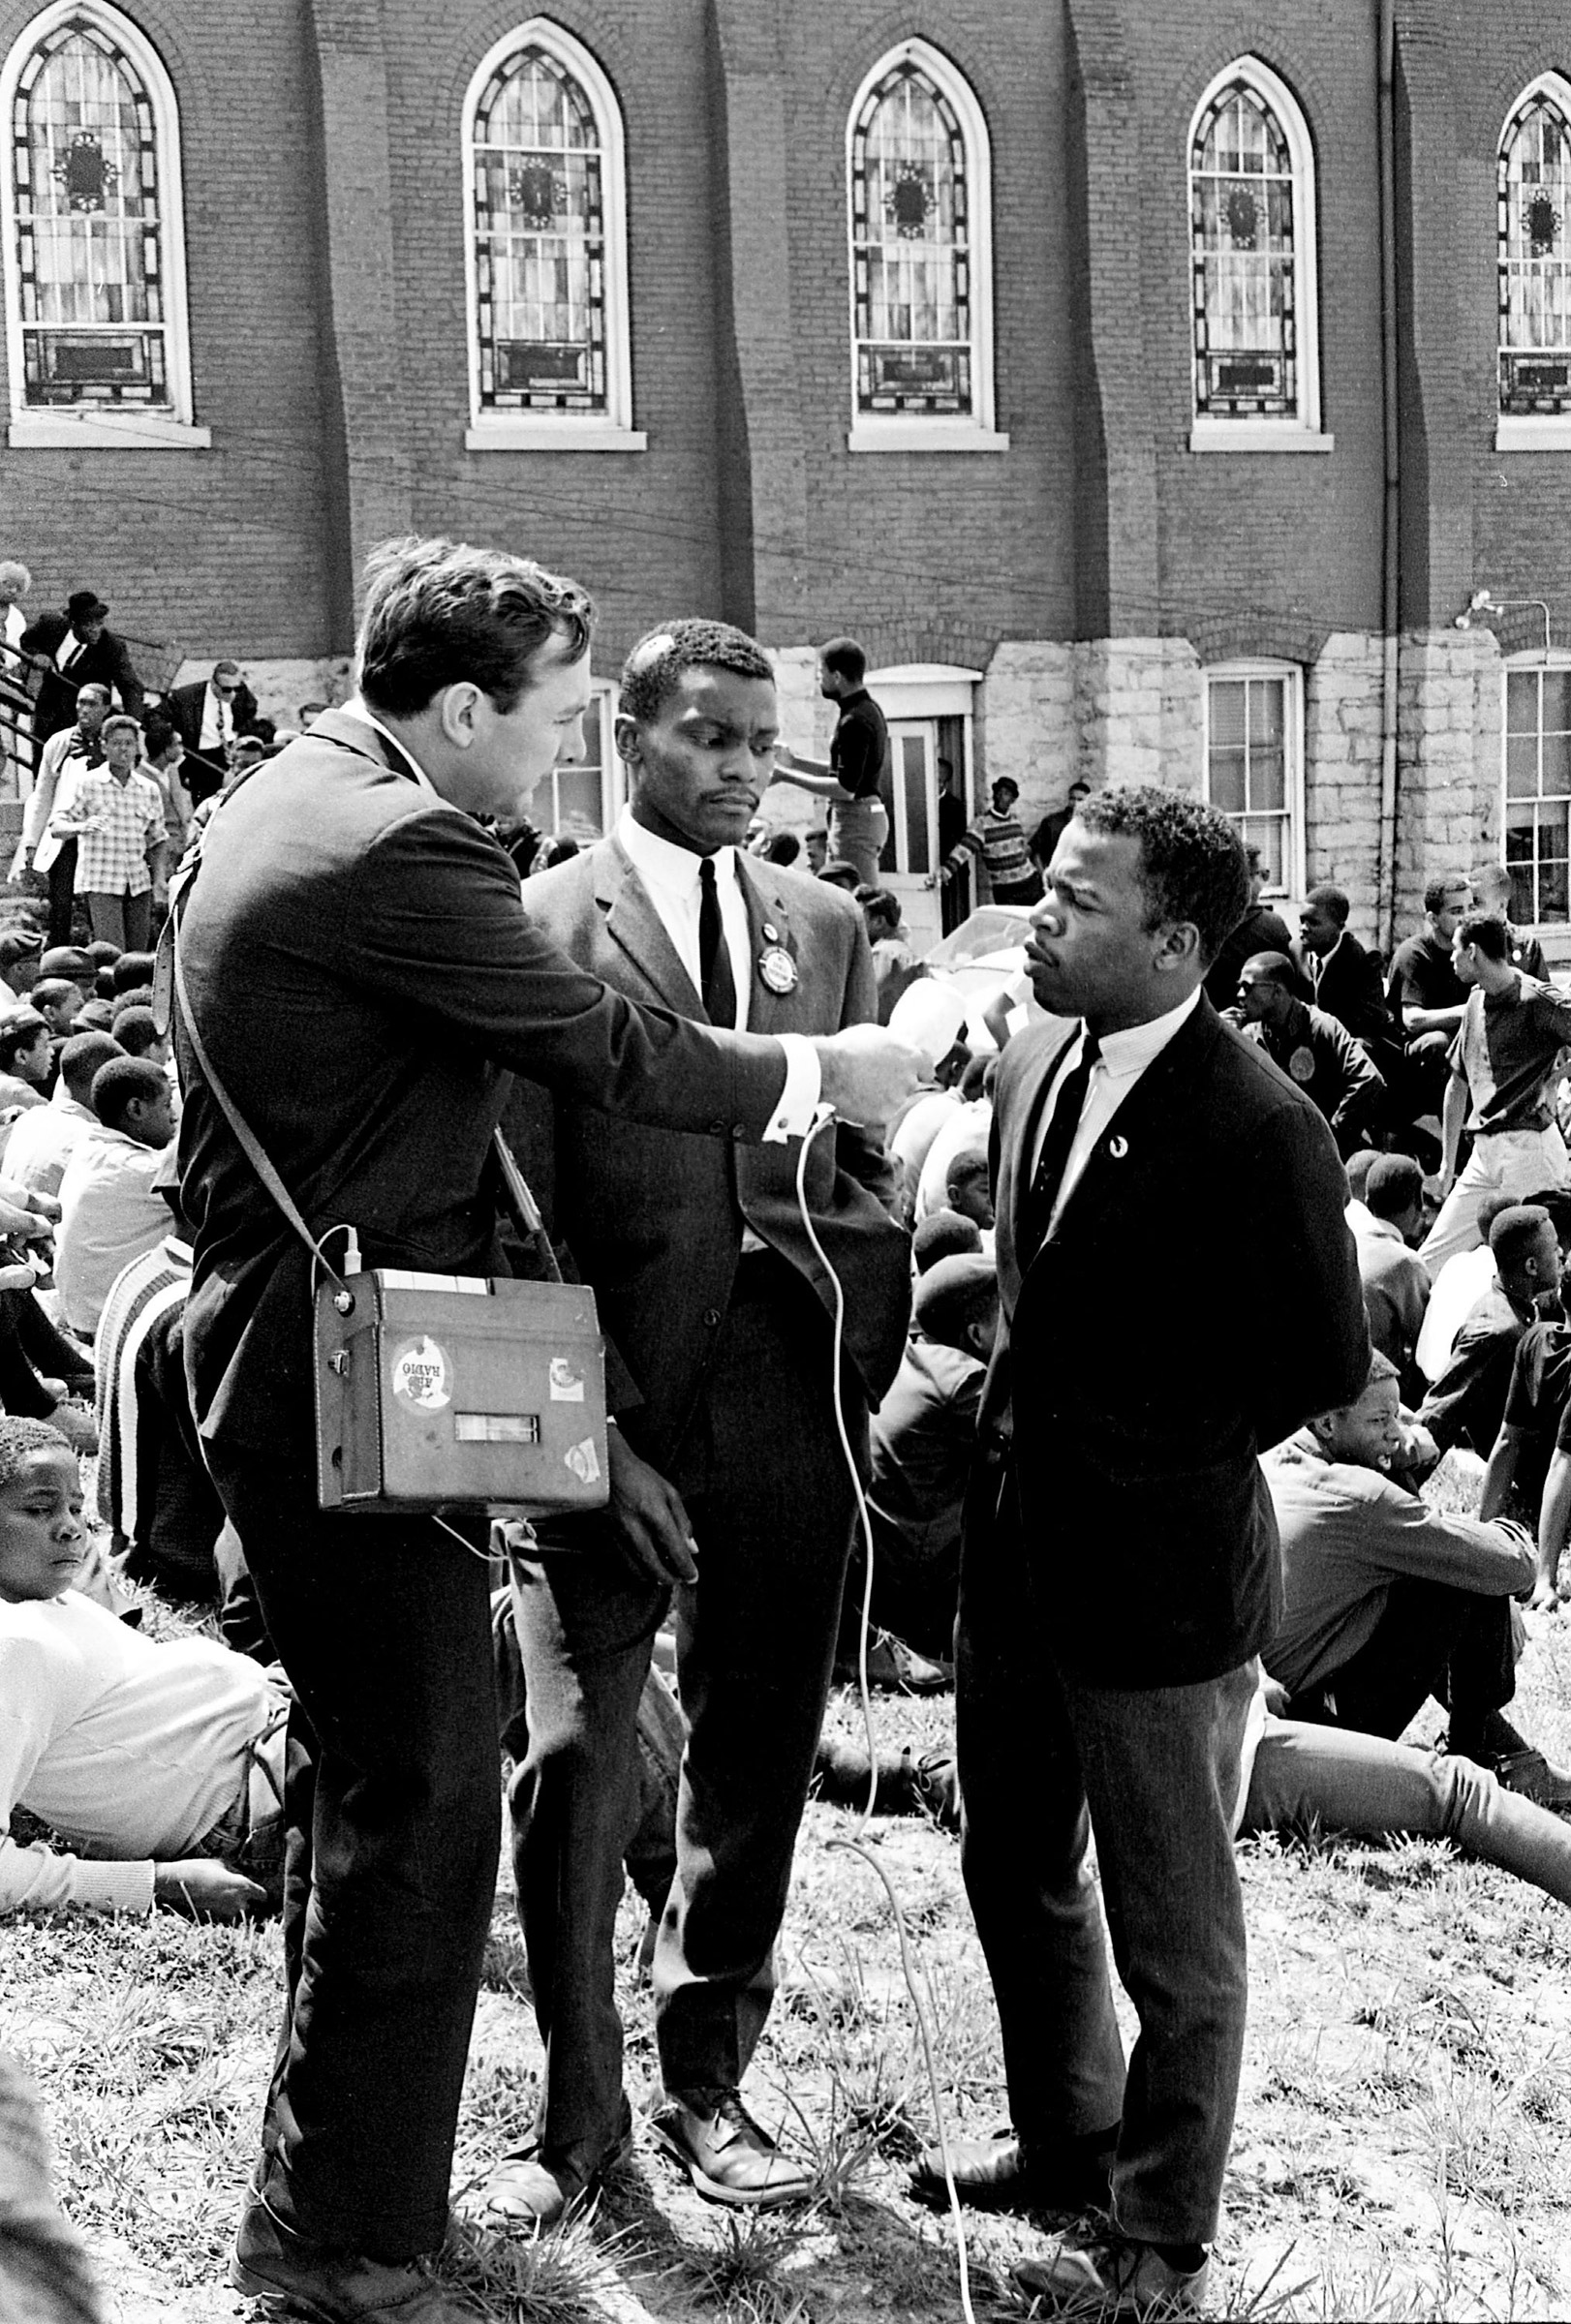 John Lewis, right, and Lester McKinnie, center, are interviewed by ABC News' Southern bureau chief Paul Good at the sit-in demonstrators' base at the First Baptist Church in Nashville, April 30, 1964.